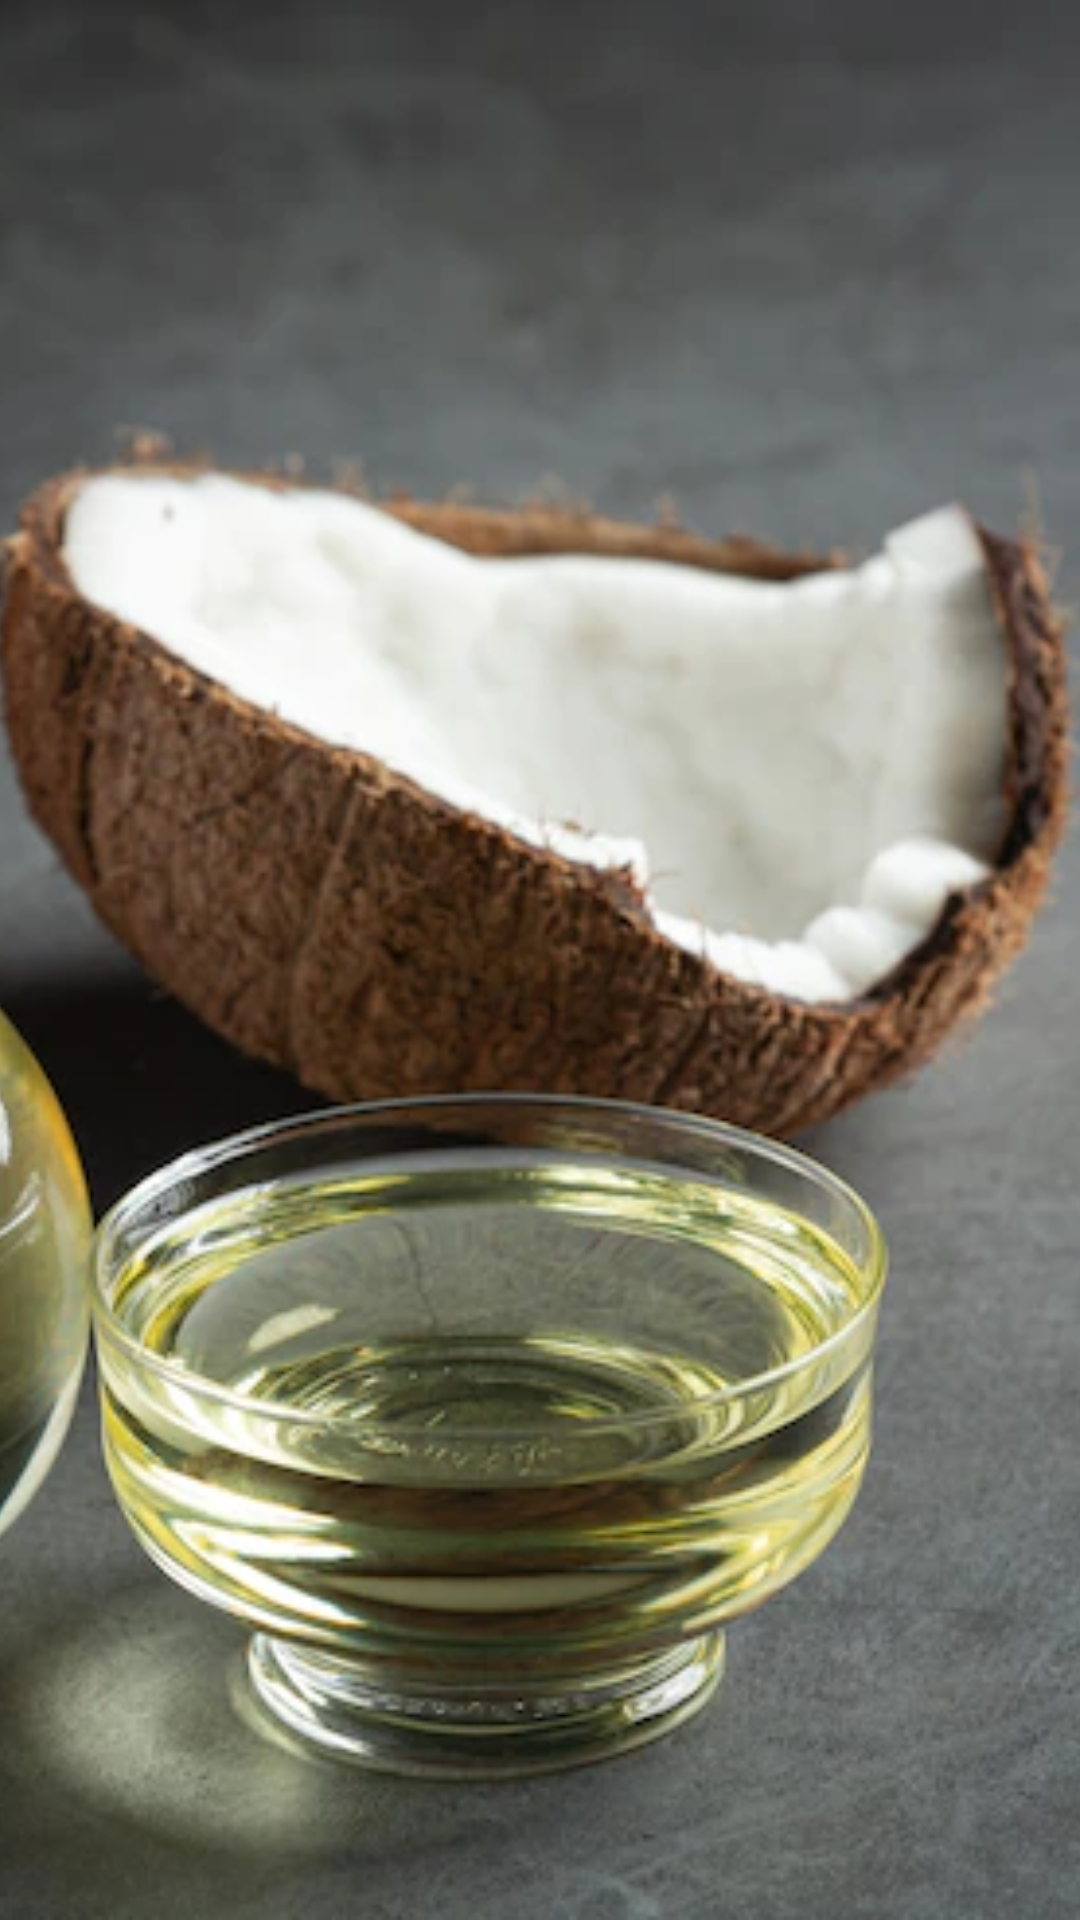 5 benefits of coconut oil you should know